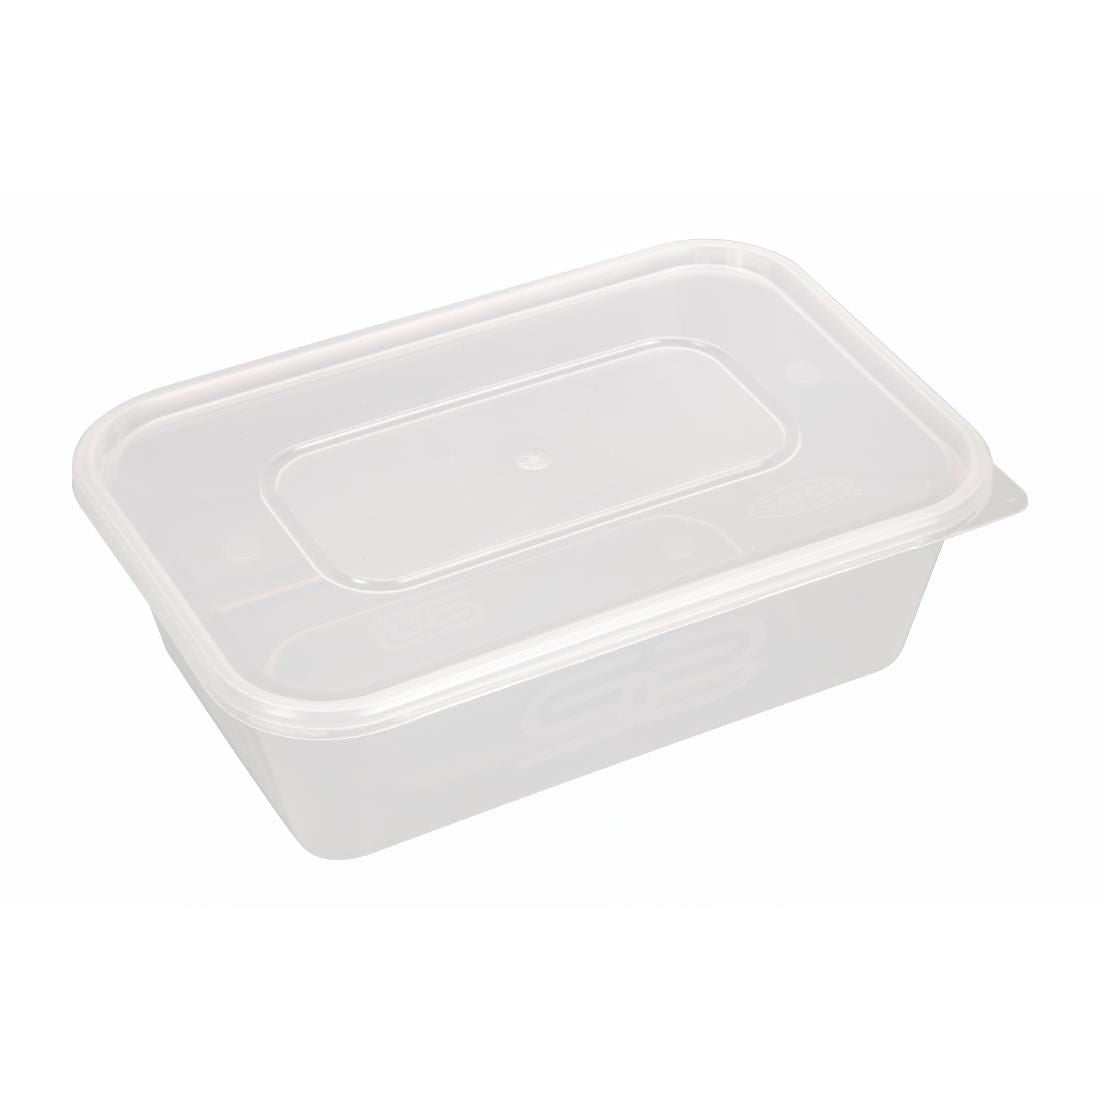 Premium Takeaway Food Containers With Lid 650ml / 23oz (Pack of 250) - FC091 Takeaway Food Containers Non Branded   